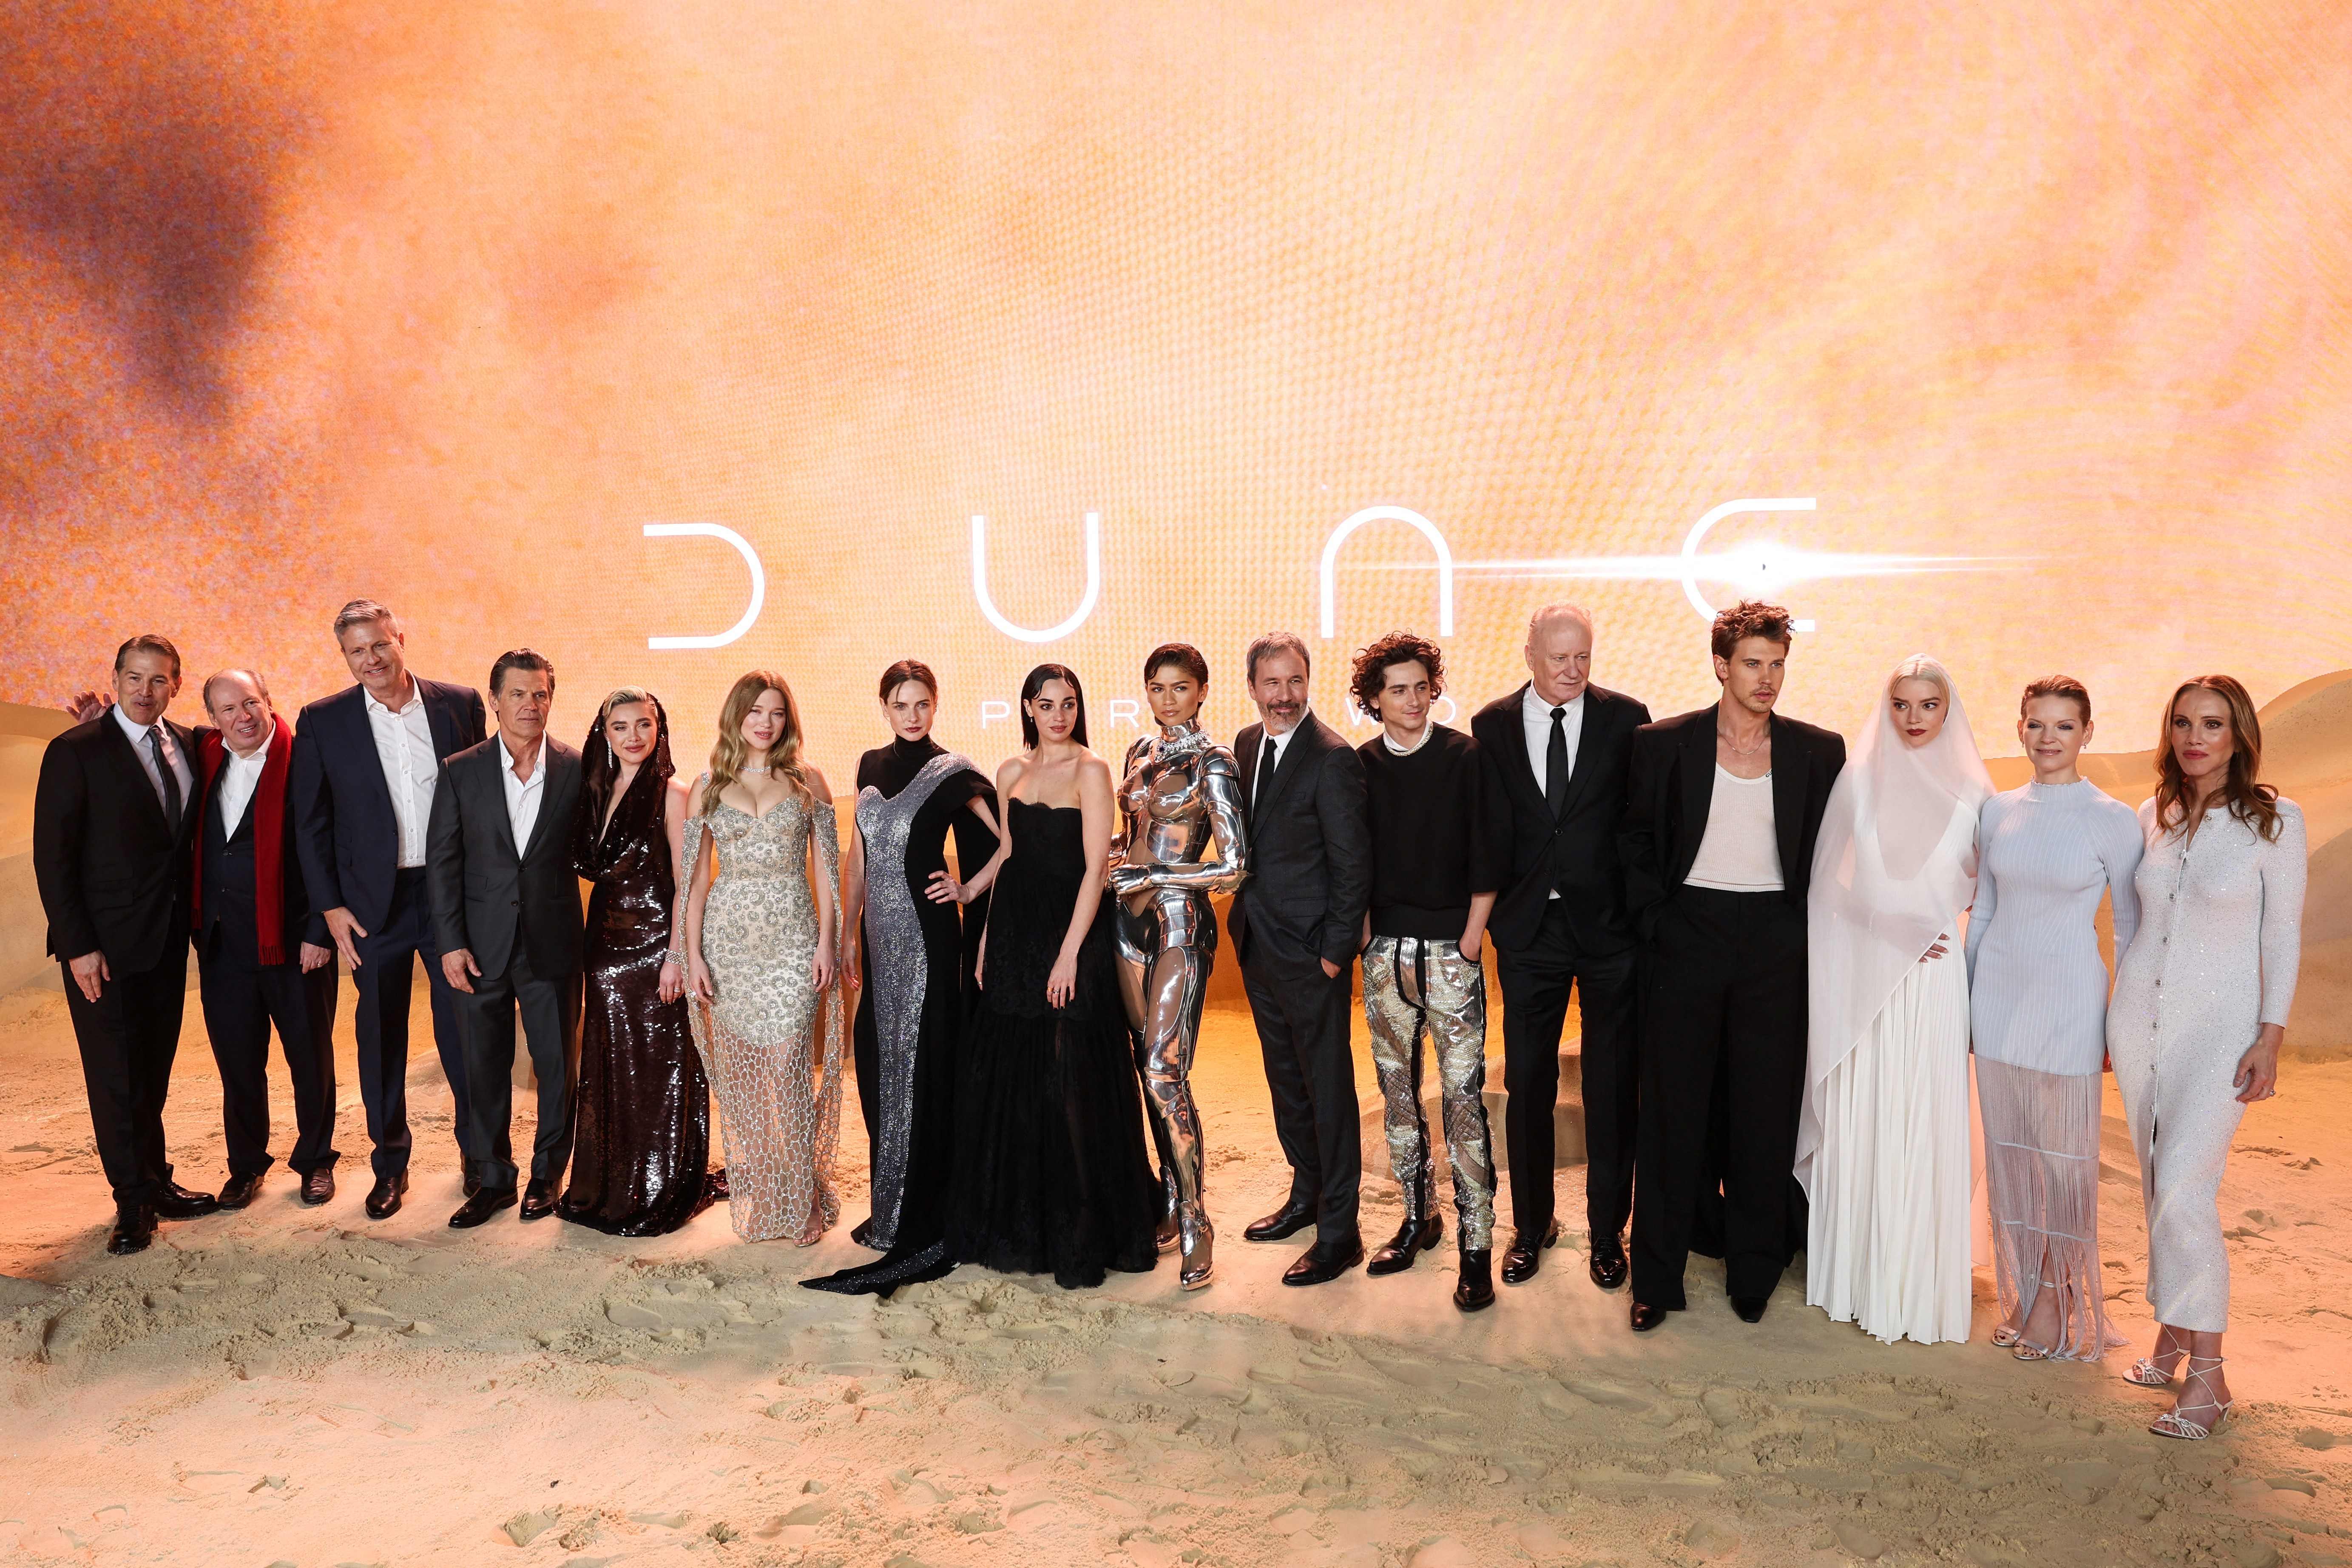 The cast of Dune 2 all posed for a picture to promote their movie. Don't they all look amazing? We can't wait for the second installment of the movie